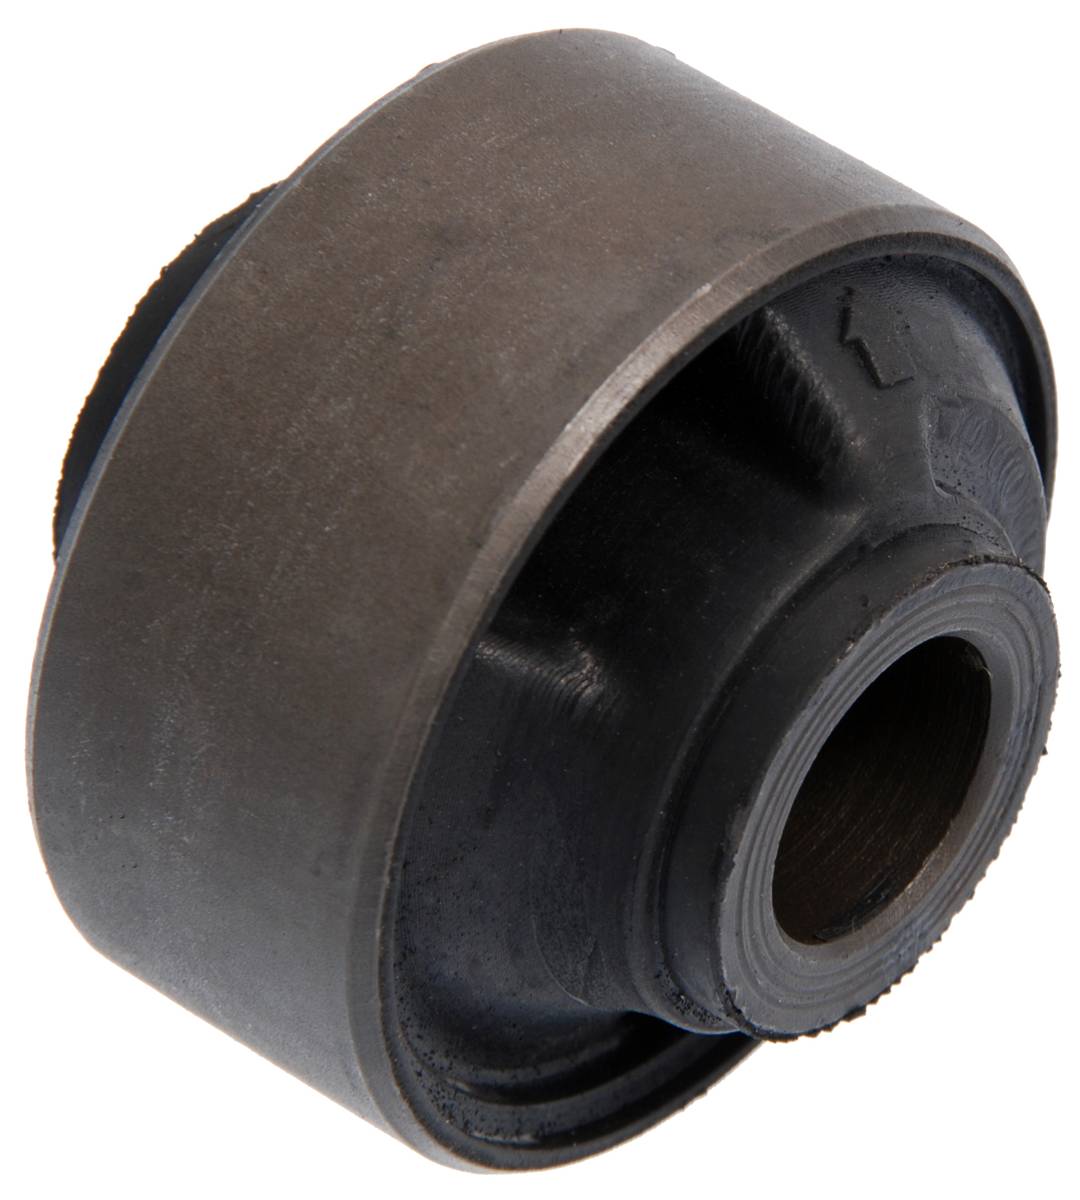 One New Genuine Suspension Control Arm Bushing Front Lower Forward 51391TR0305